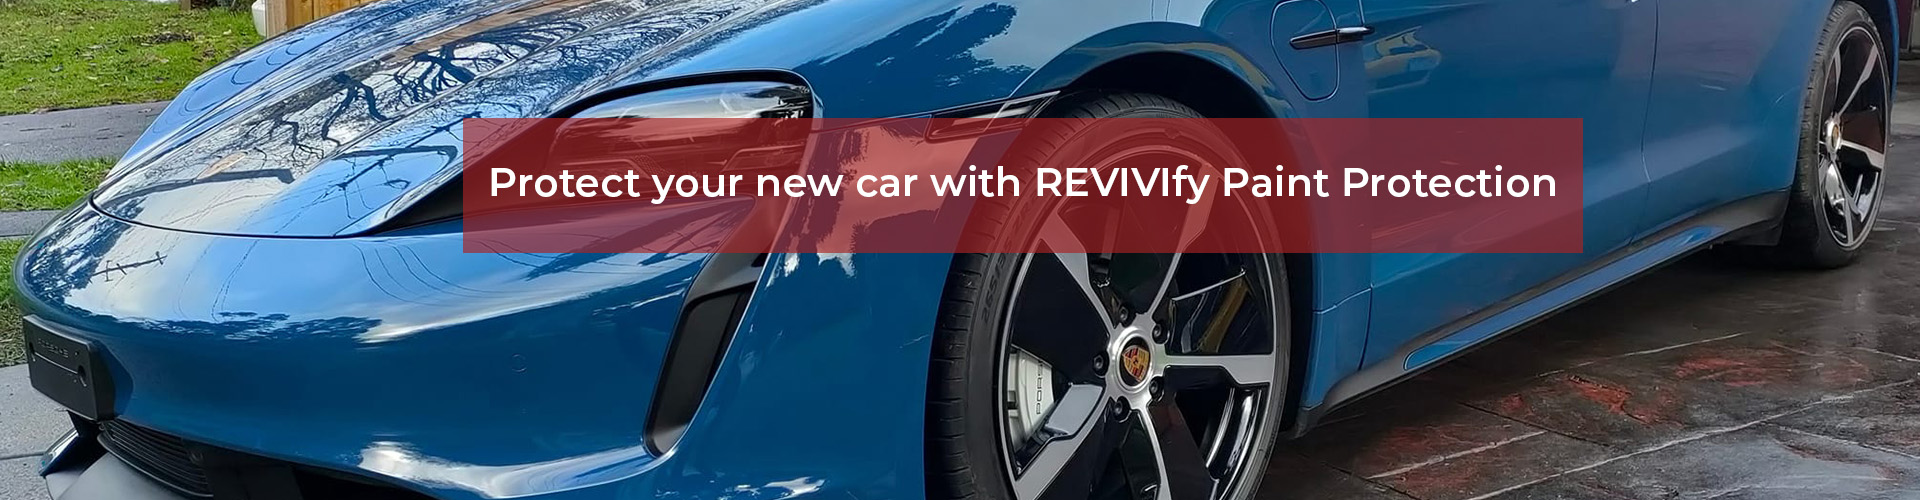 Protect your new car with REVIVIfy Paint Protection